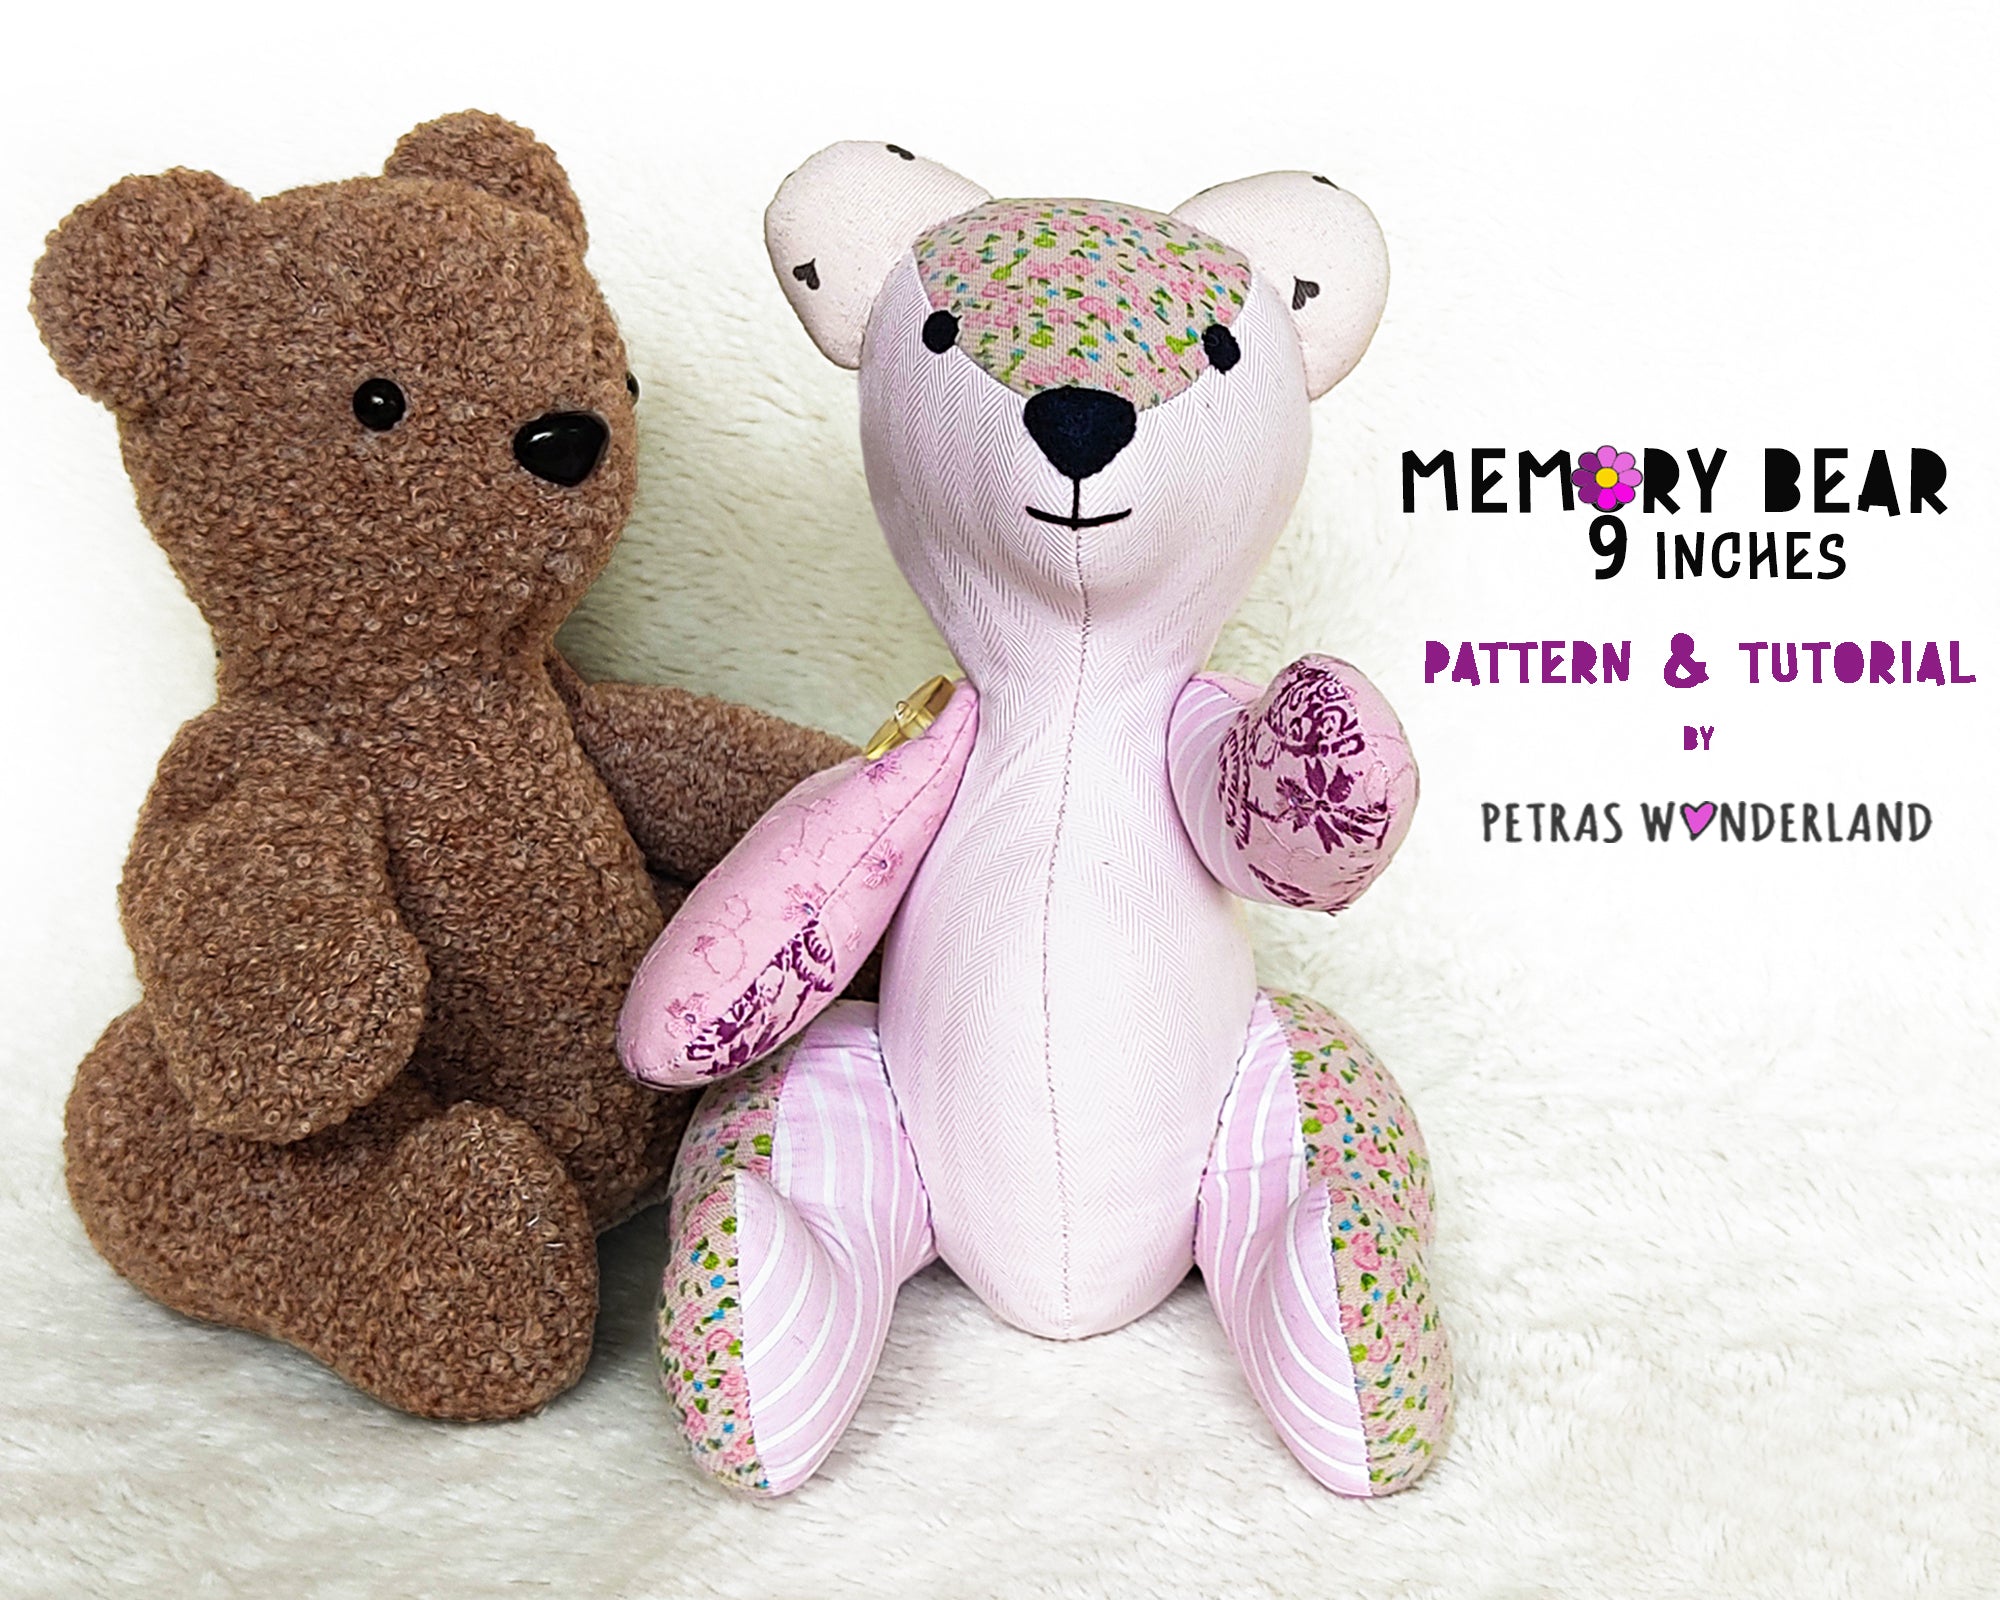 Memory Bear 9 inches - PDF sewing pattern and tutorial – Petras